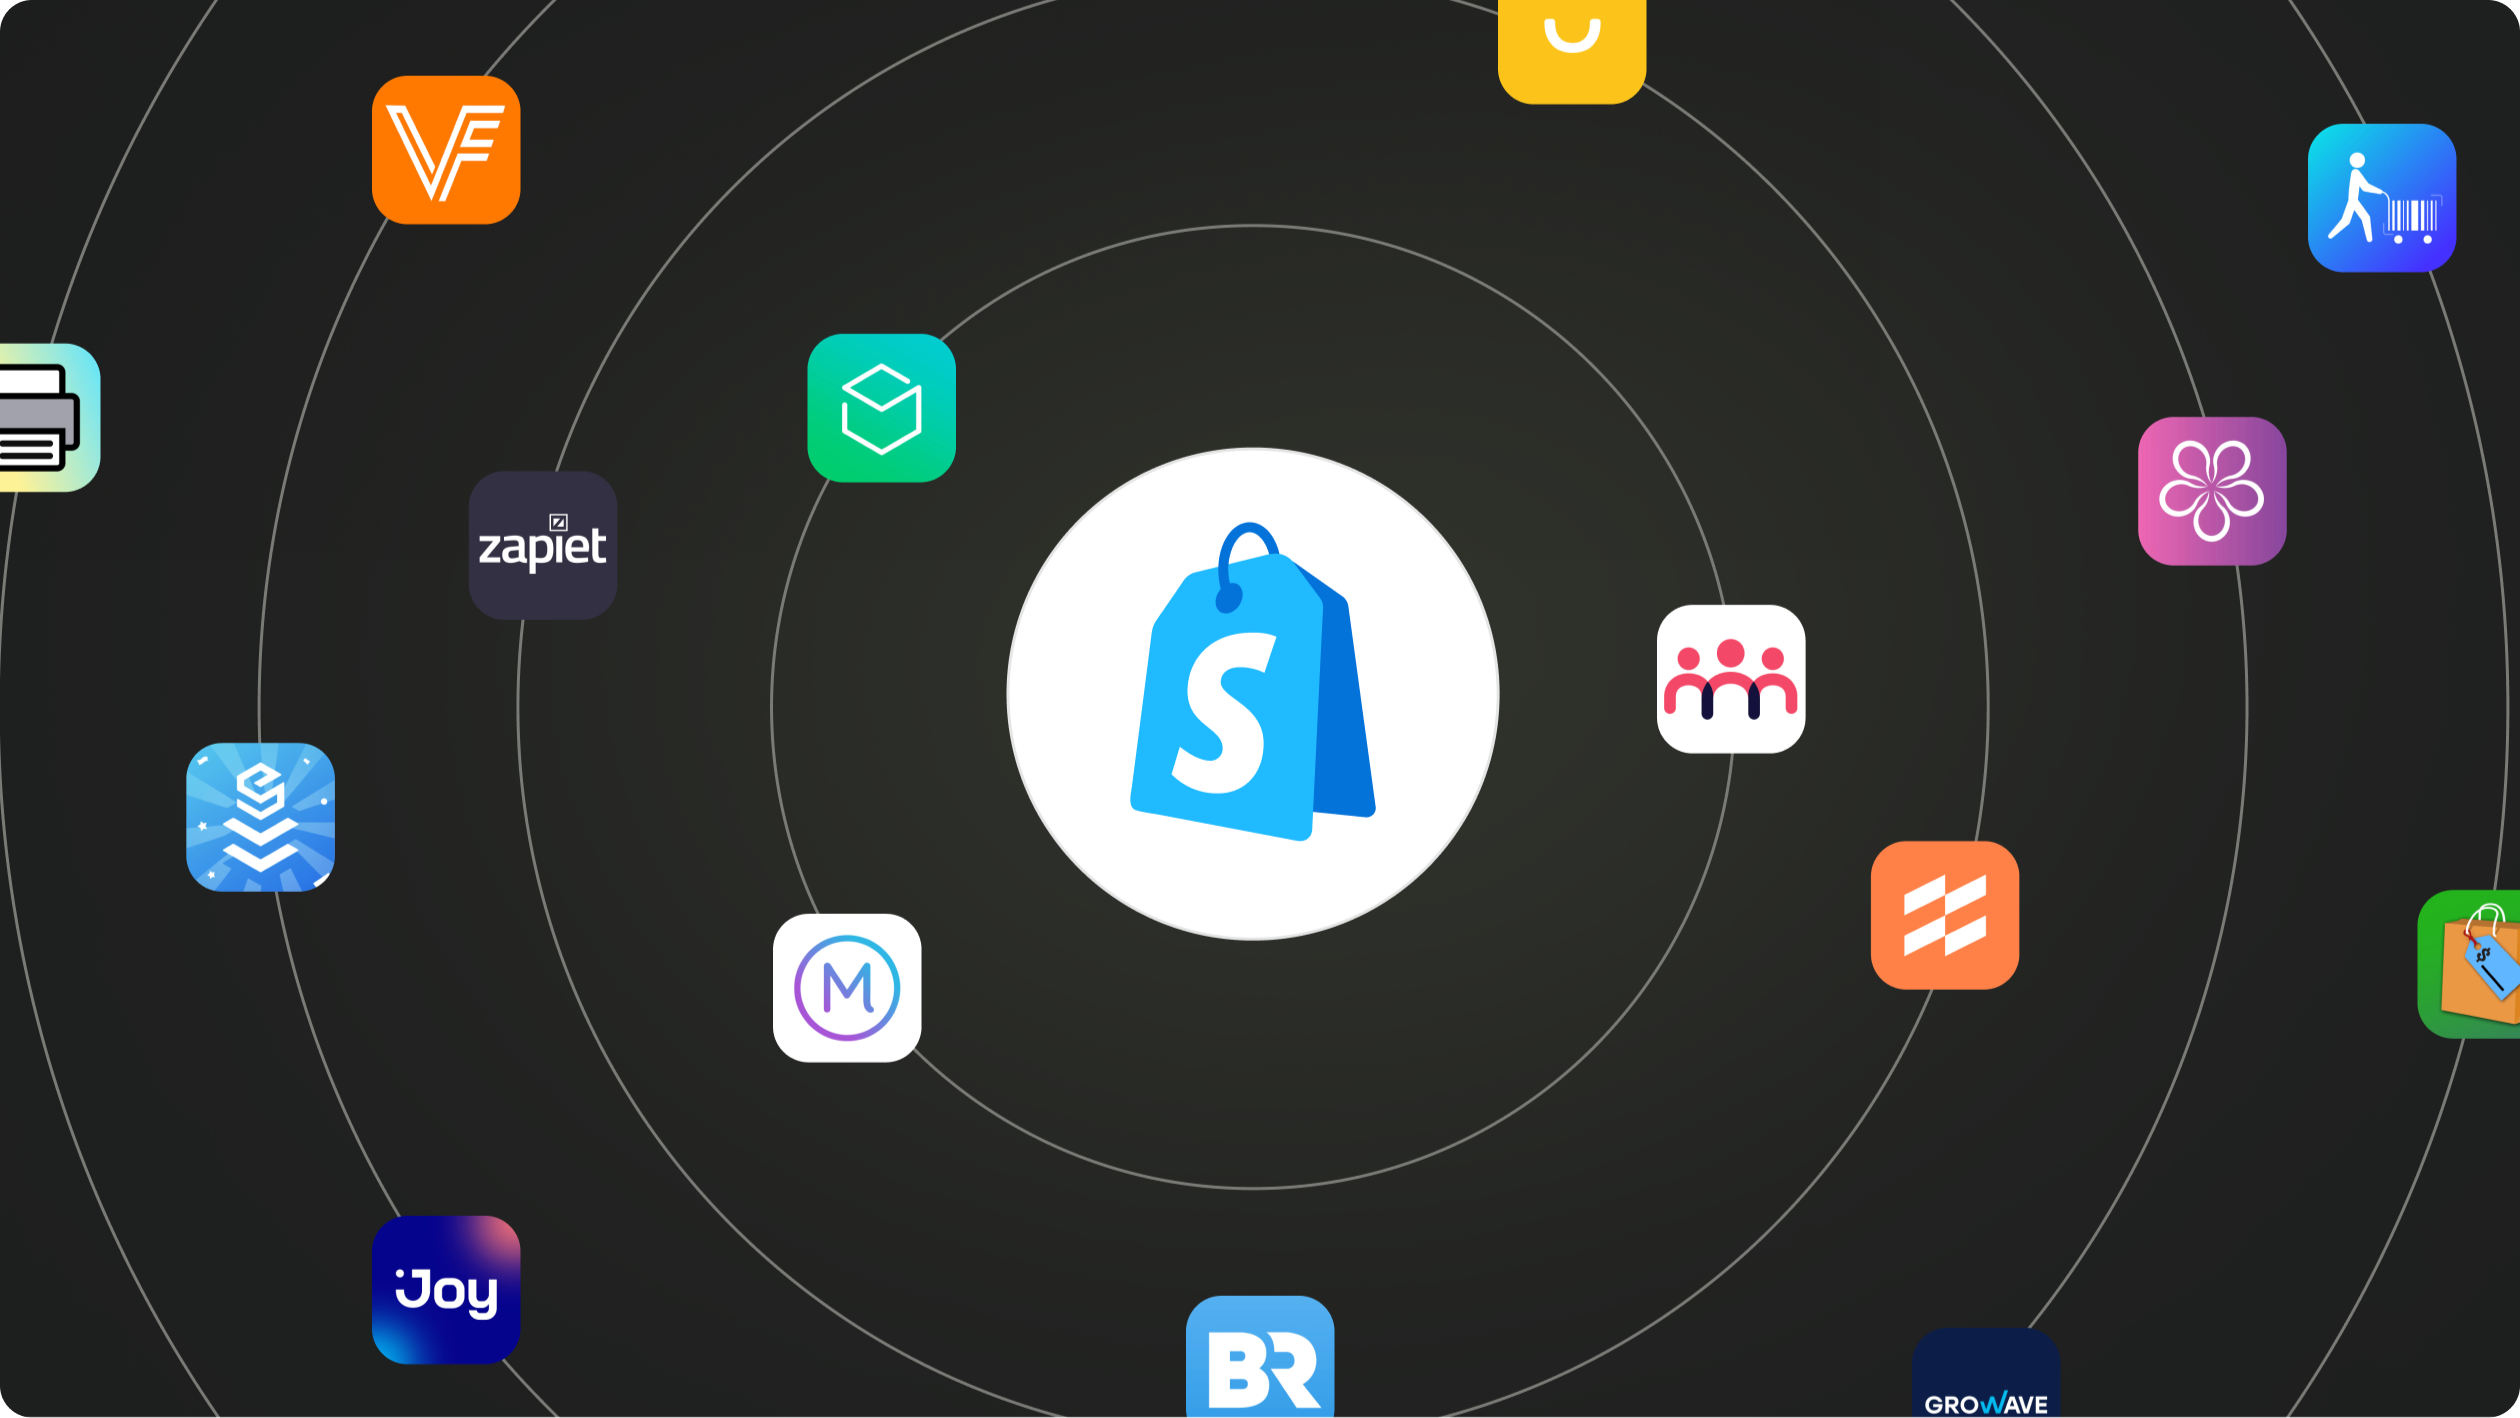 A collection of app and UI extensions icons. In the middle is the Shopify POS logo; around the logo are icons for popular apps: EasyTeam, Filljoy, Zapiet, Optizio, Stocky, Order Printer, Smile, Better Reports, Marsello, and Endear.